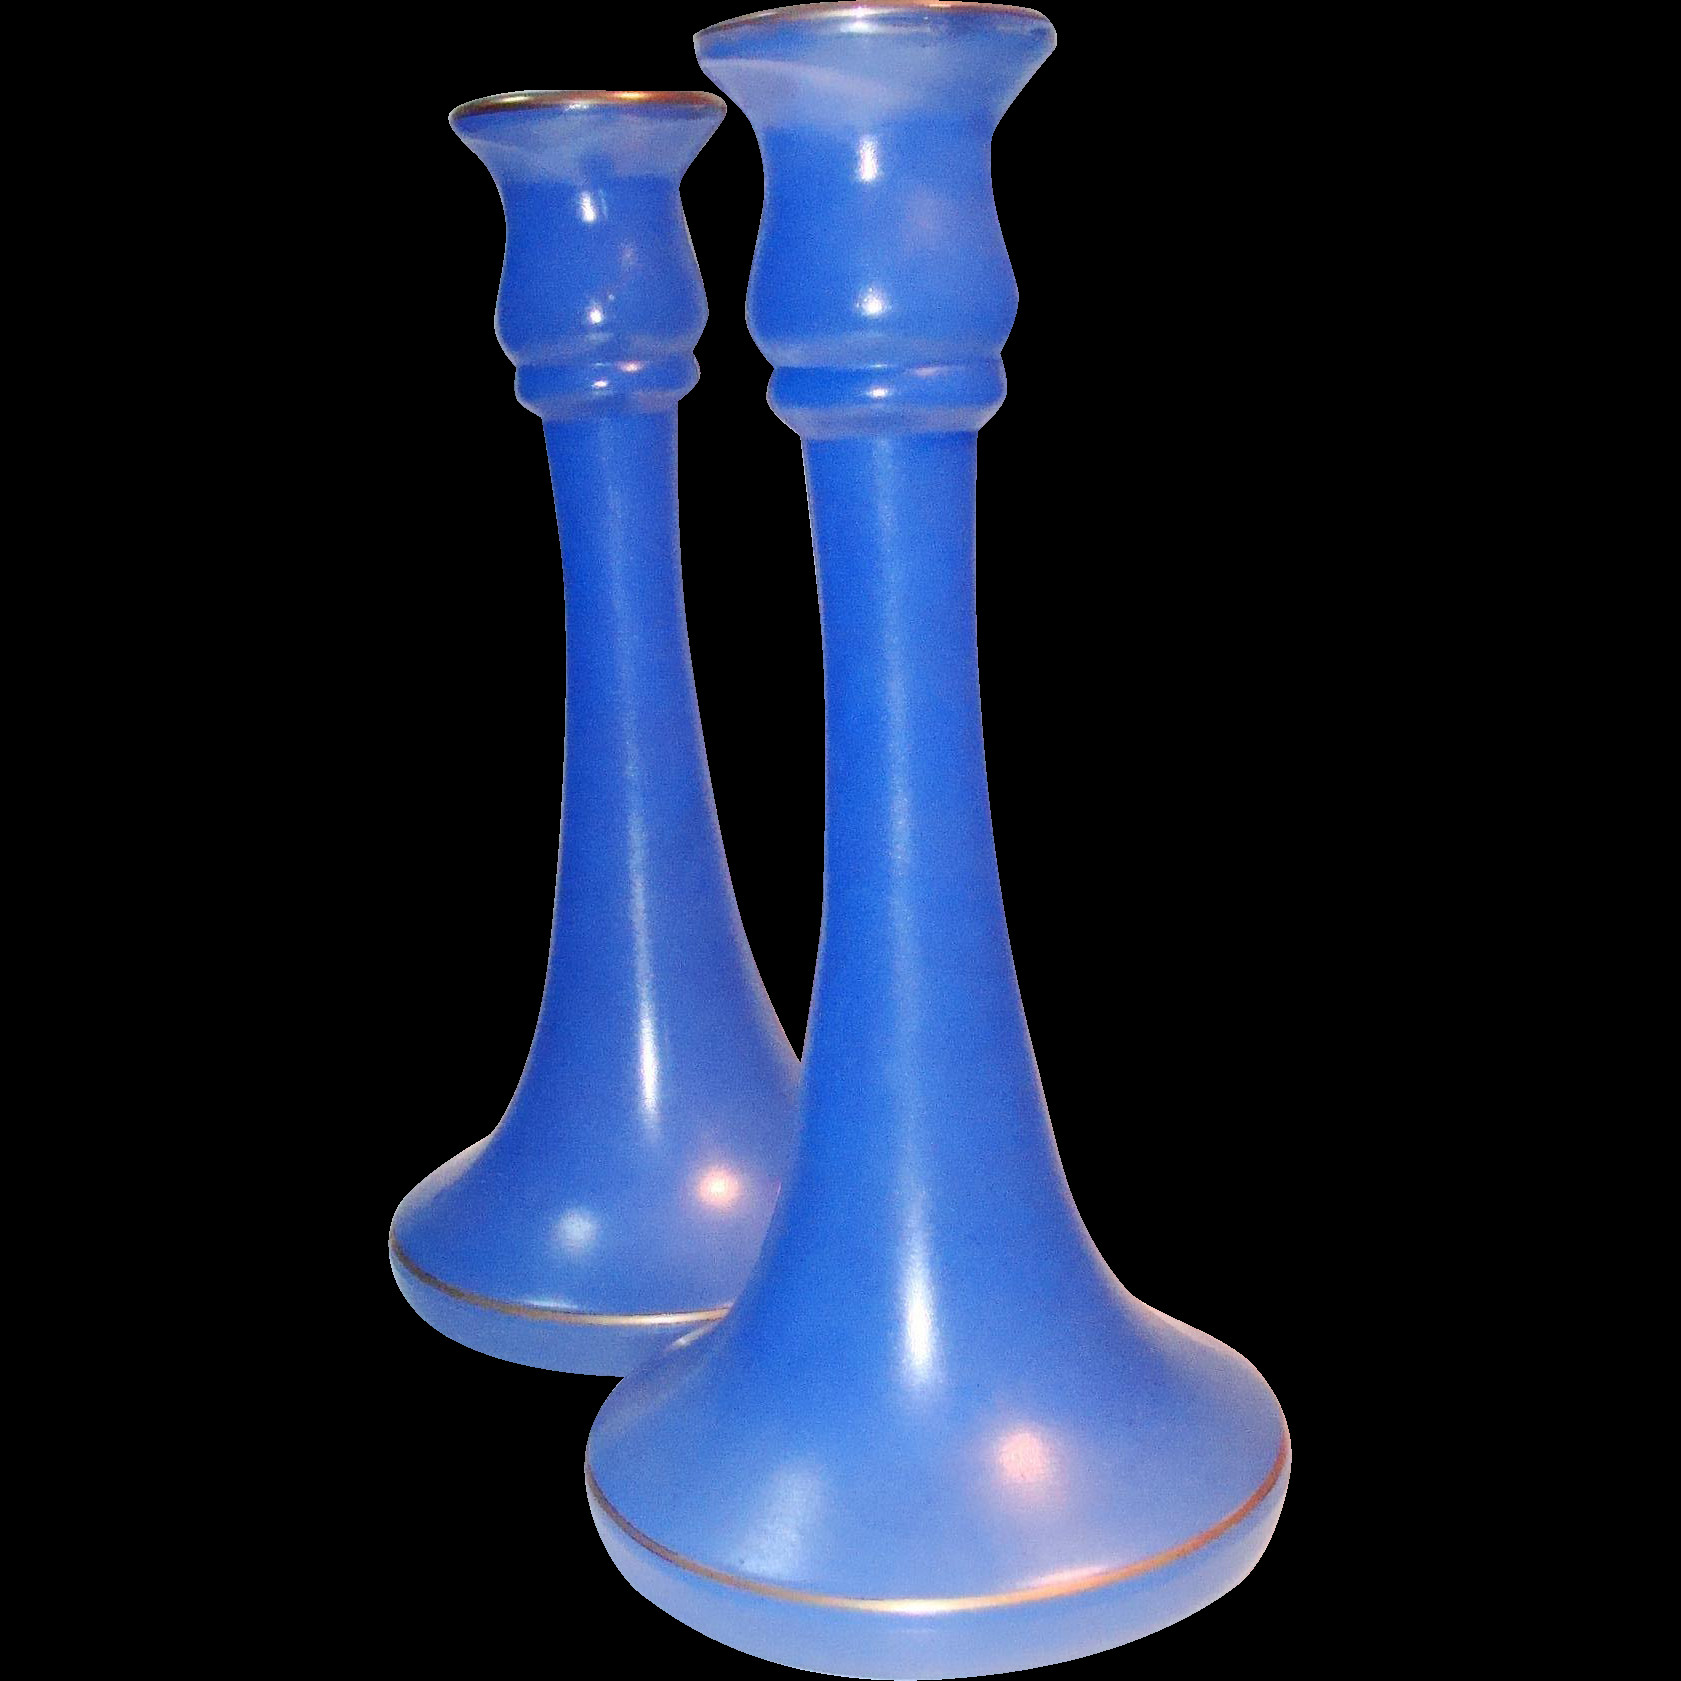 14 Stylish Blue Glass Tall Vase 2024 free download blue glass tall vase of cool blue frosted glass candlesticks pair 9 tall in cool blue glass candlesticks a pair to use on your table to make you at least feel cool in summer